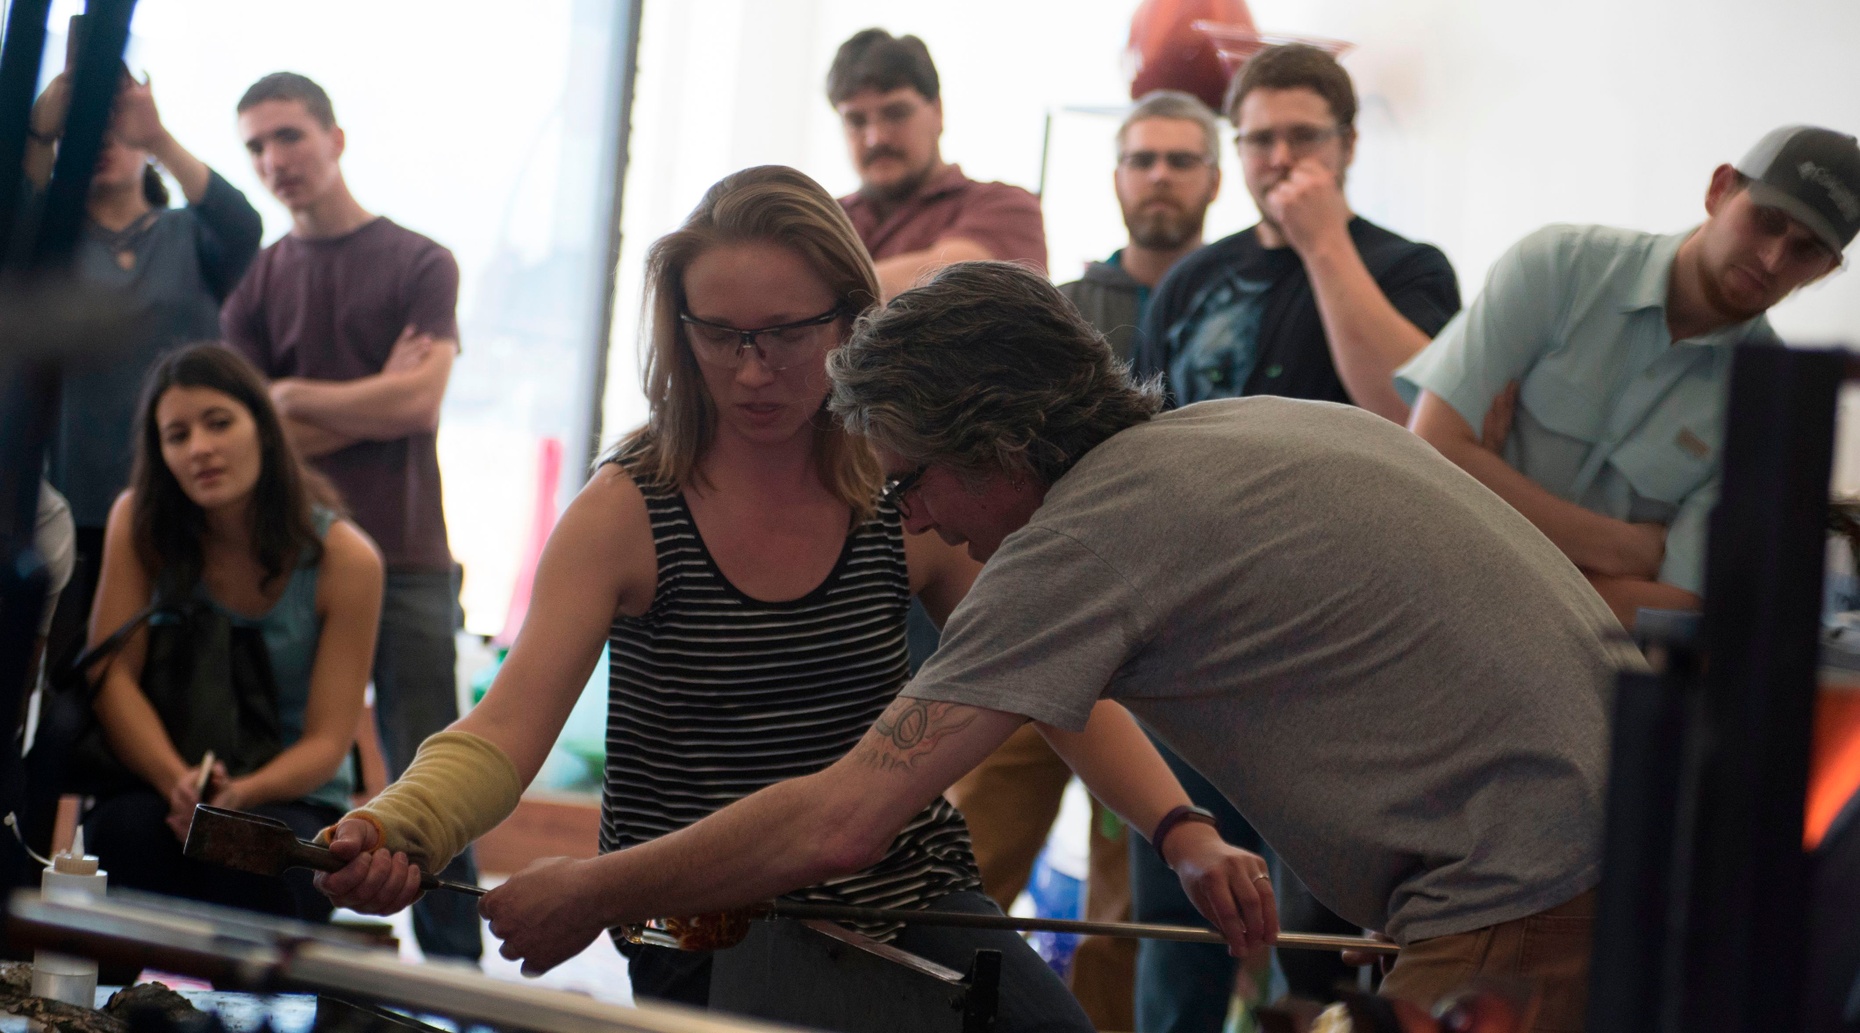 Introduction to Glassblowing Class